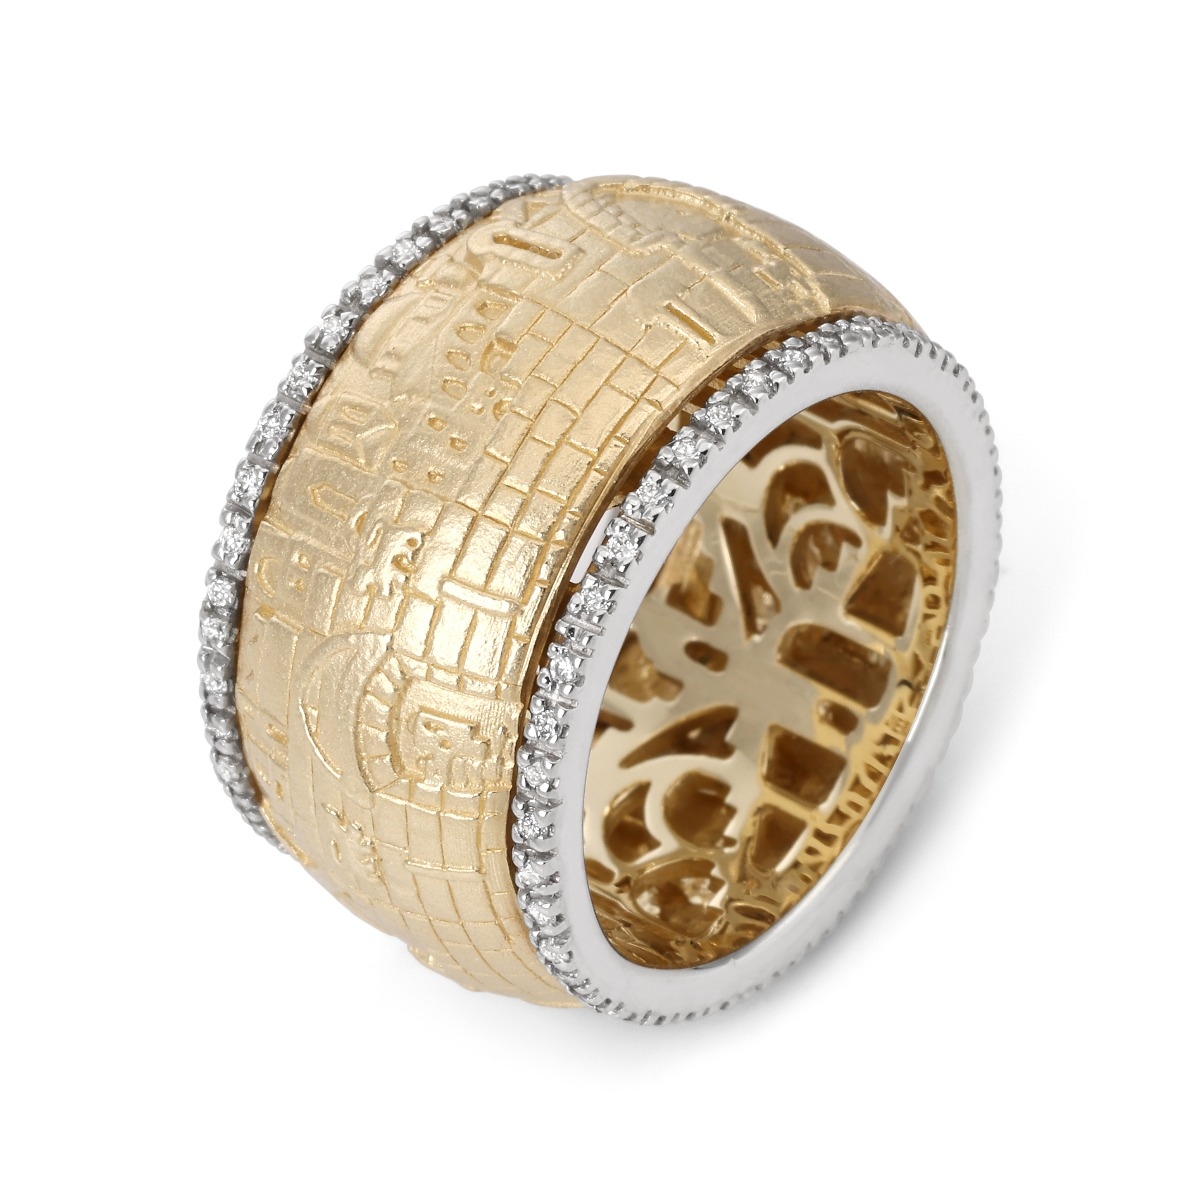 Deluxe 14K Gold Four Gates of Jerusalem Spinning Ring with White Diamonds - 1